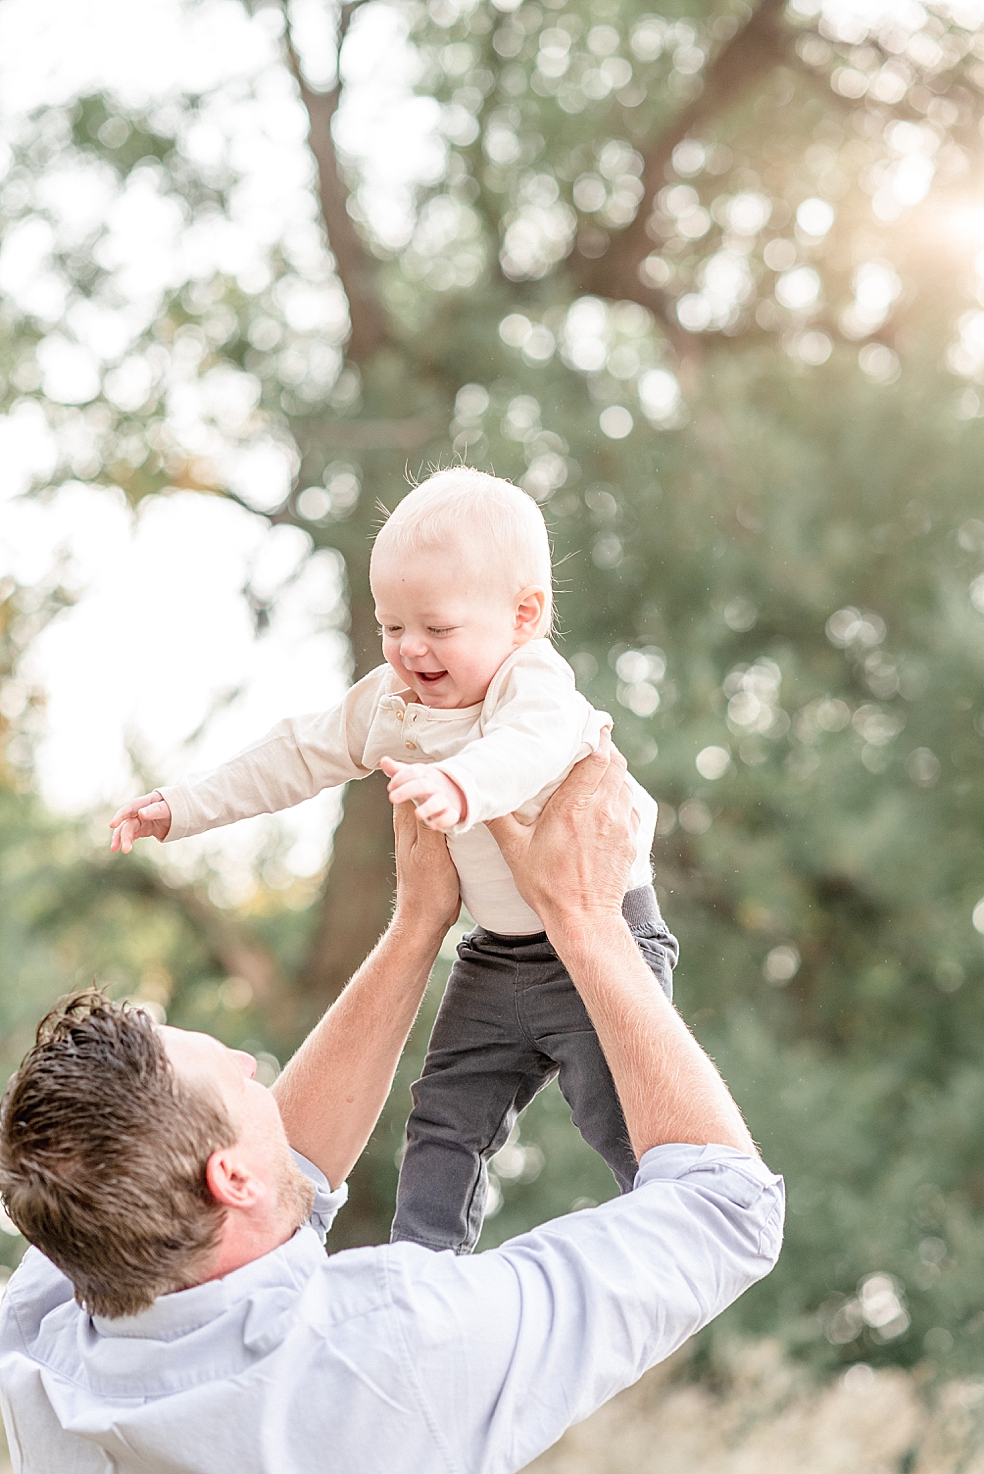 Dad playing with baby boy | Photo by Madison Alabama Baby Photographer Jessica Lee